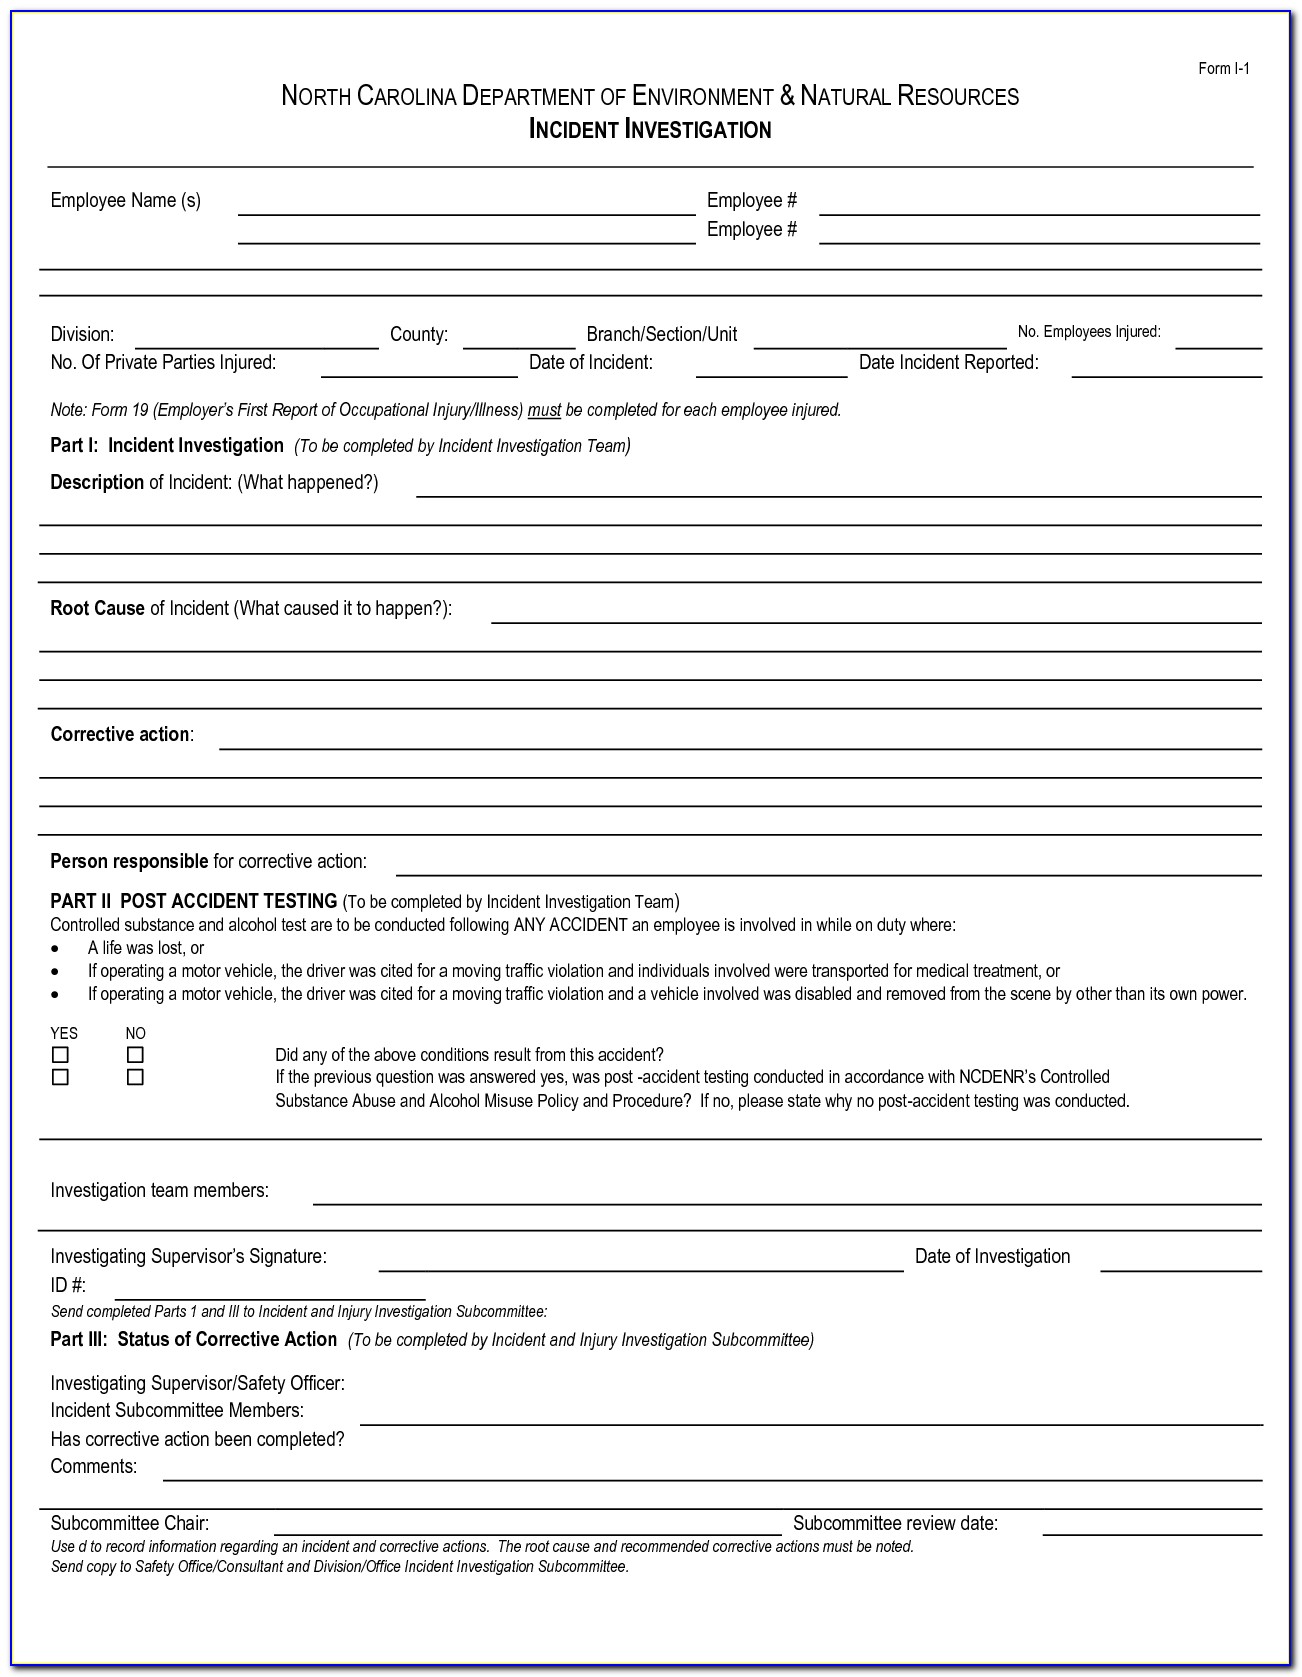 accident-incident-investigation-form-template